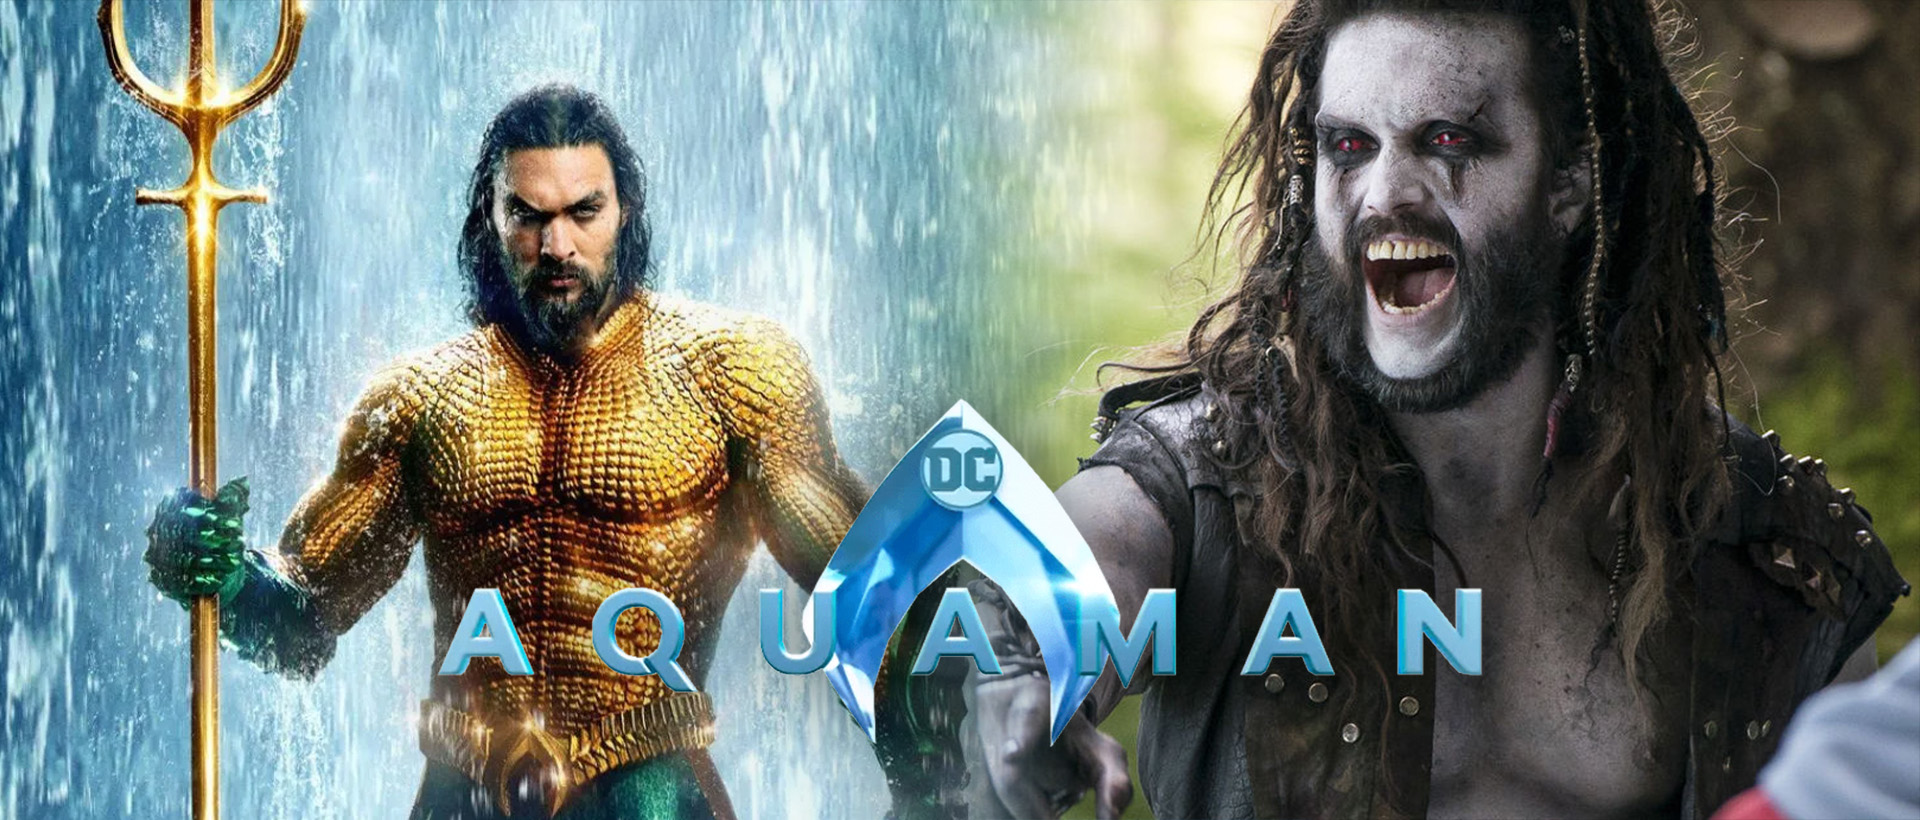 Jason Momoa's Time As 'Aquaman' Also Coming To An End - Knight ...